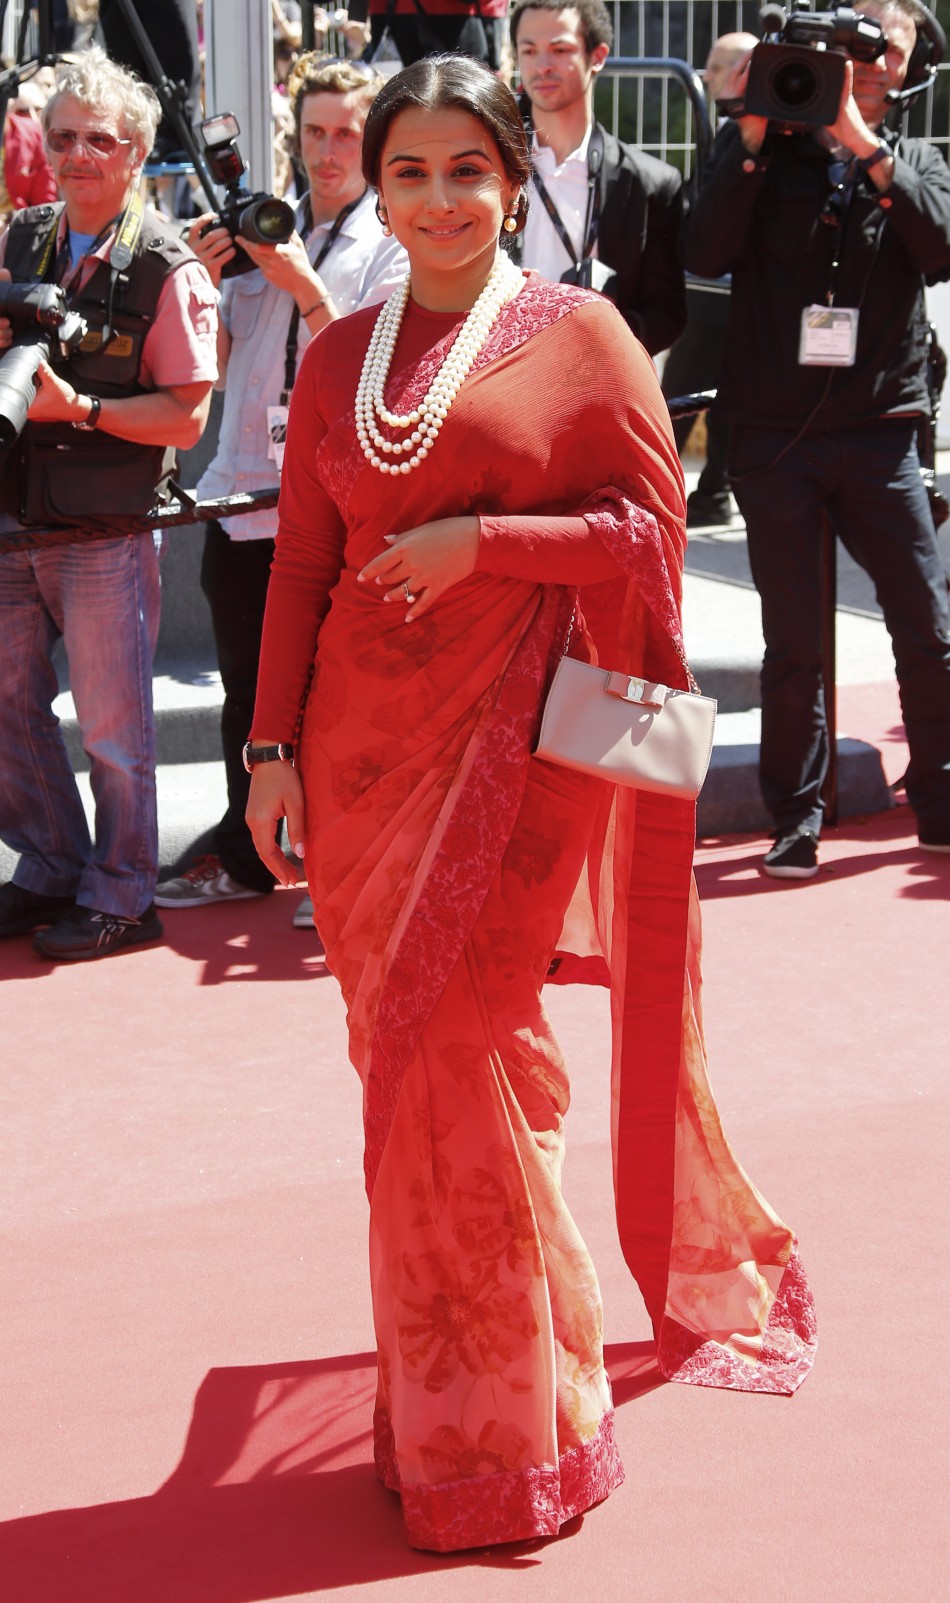 Jury Member actress Vidya Balan poses on the red carpet as she arrives for the screening of the film Un Chateau en Italie in competition during the 66th Cannes Film Festival in Cannes May 20, 2013.